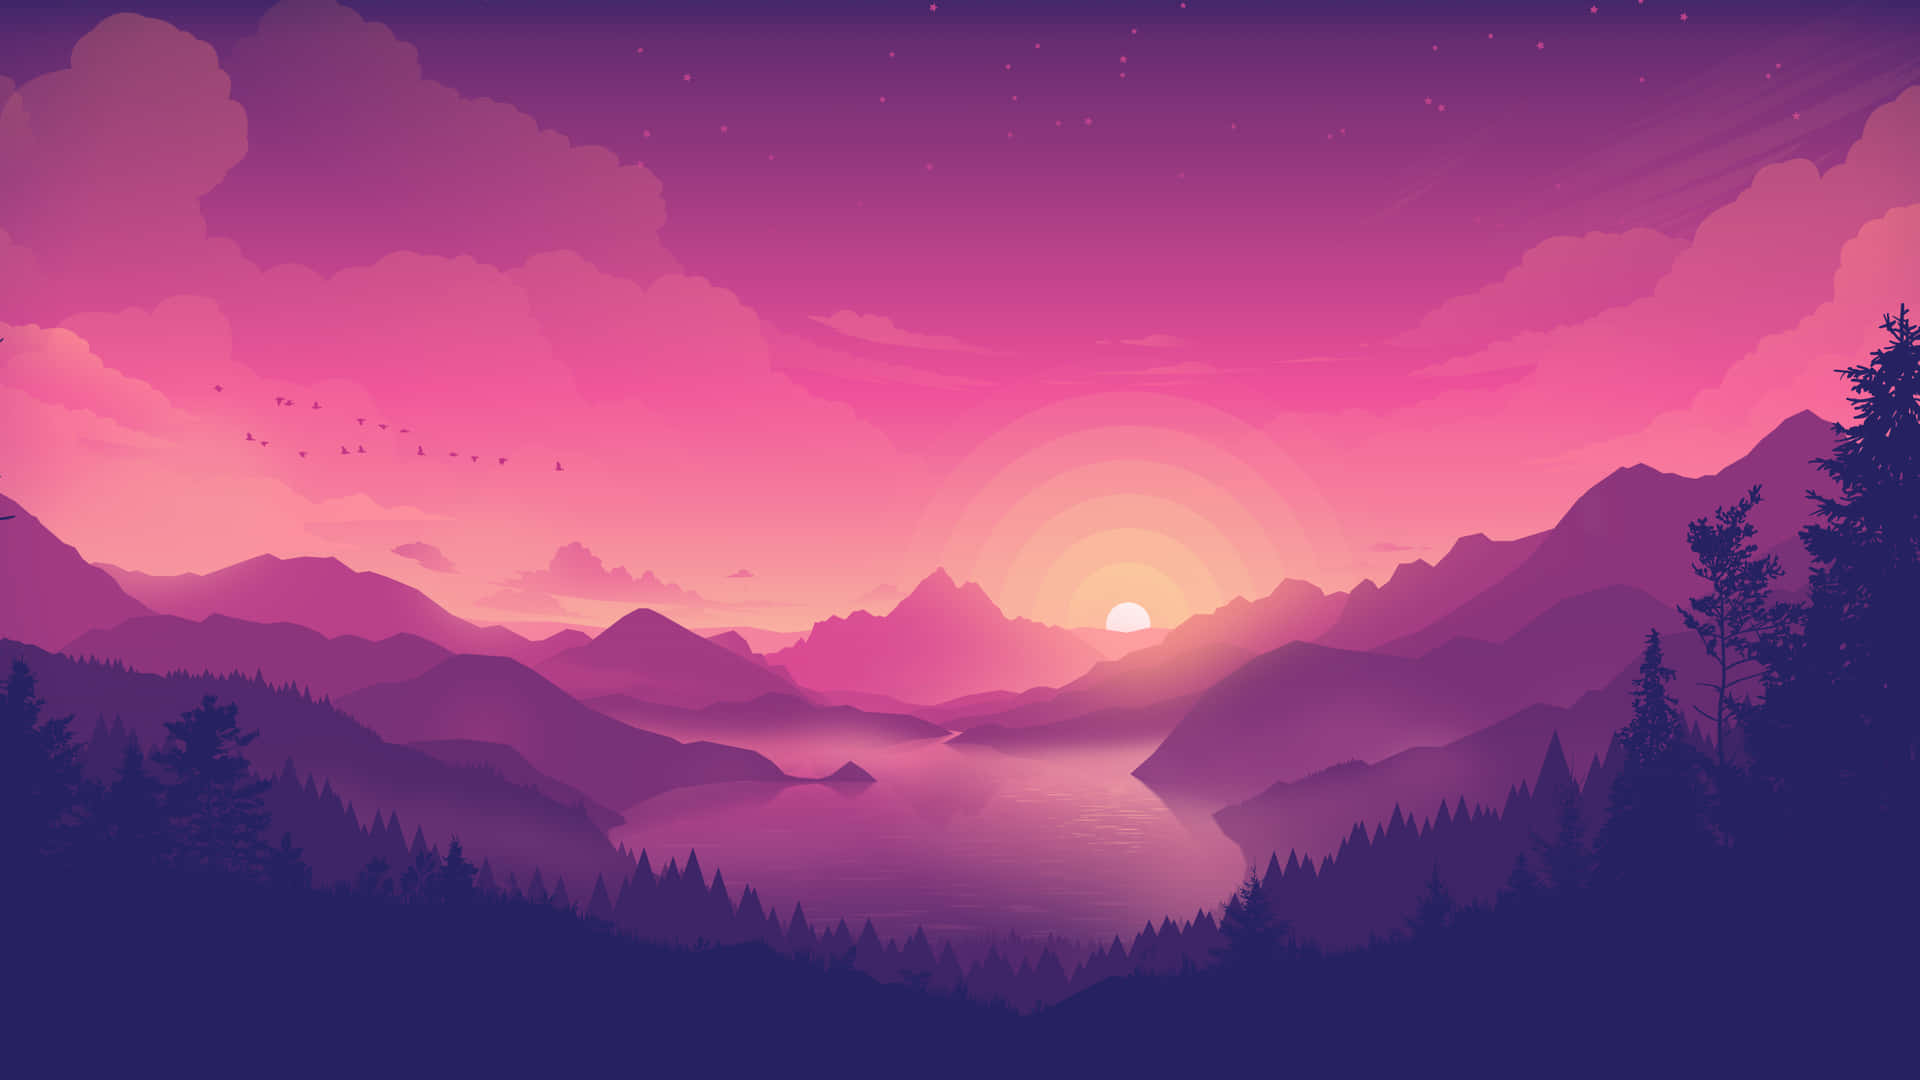 Aesthetic Nature With A Purple Landscape Background